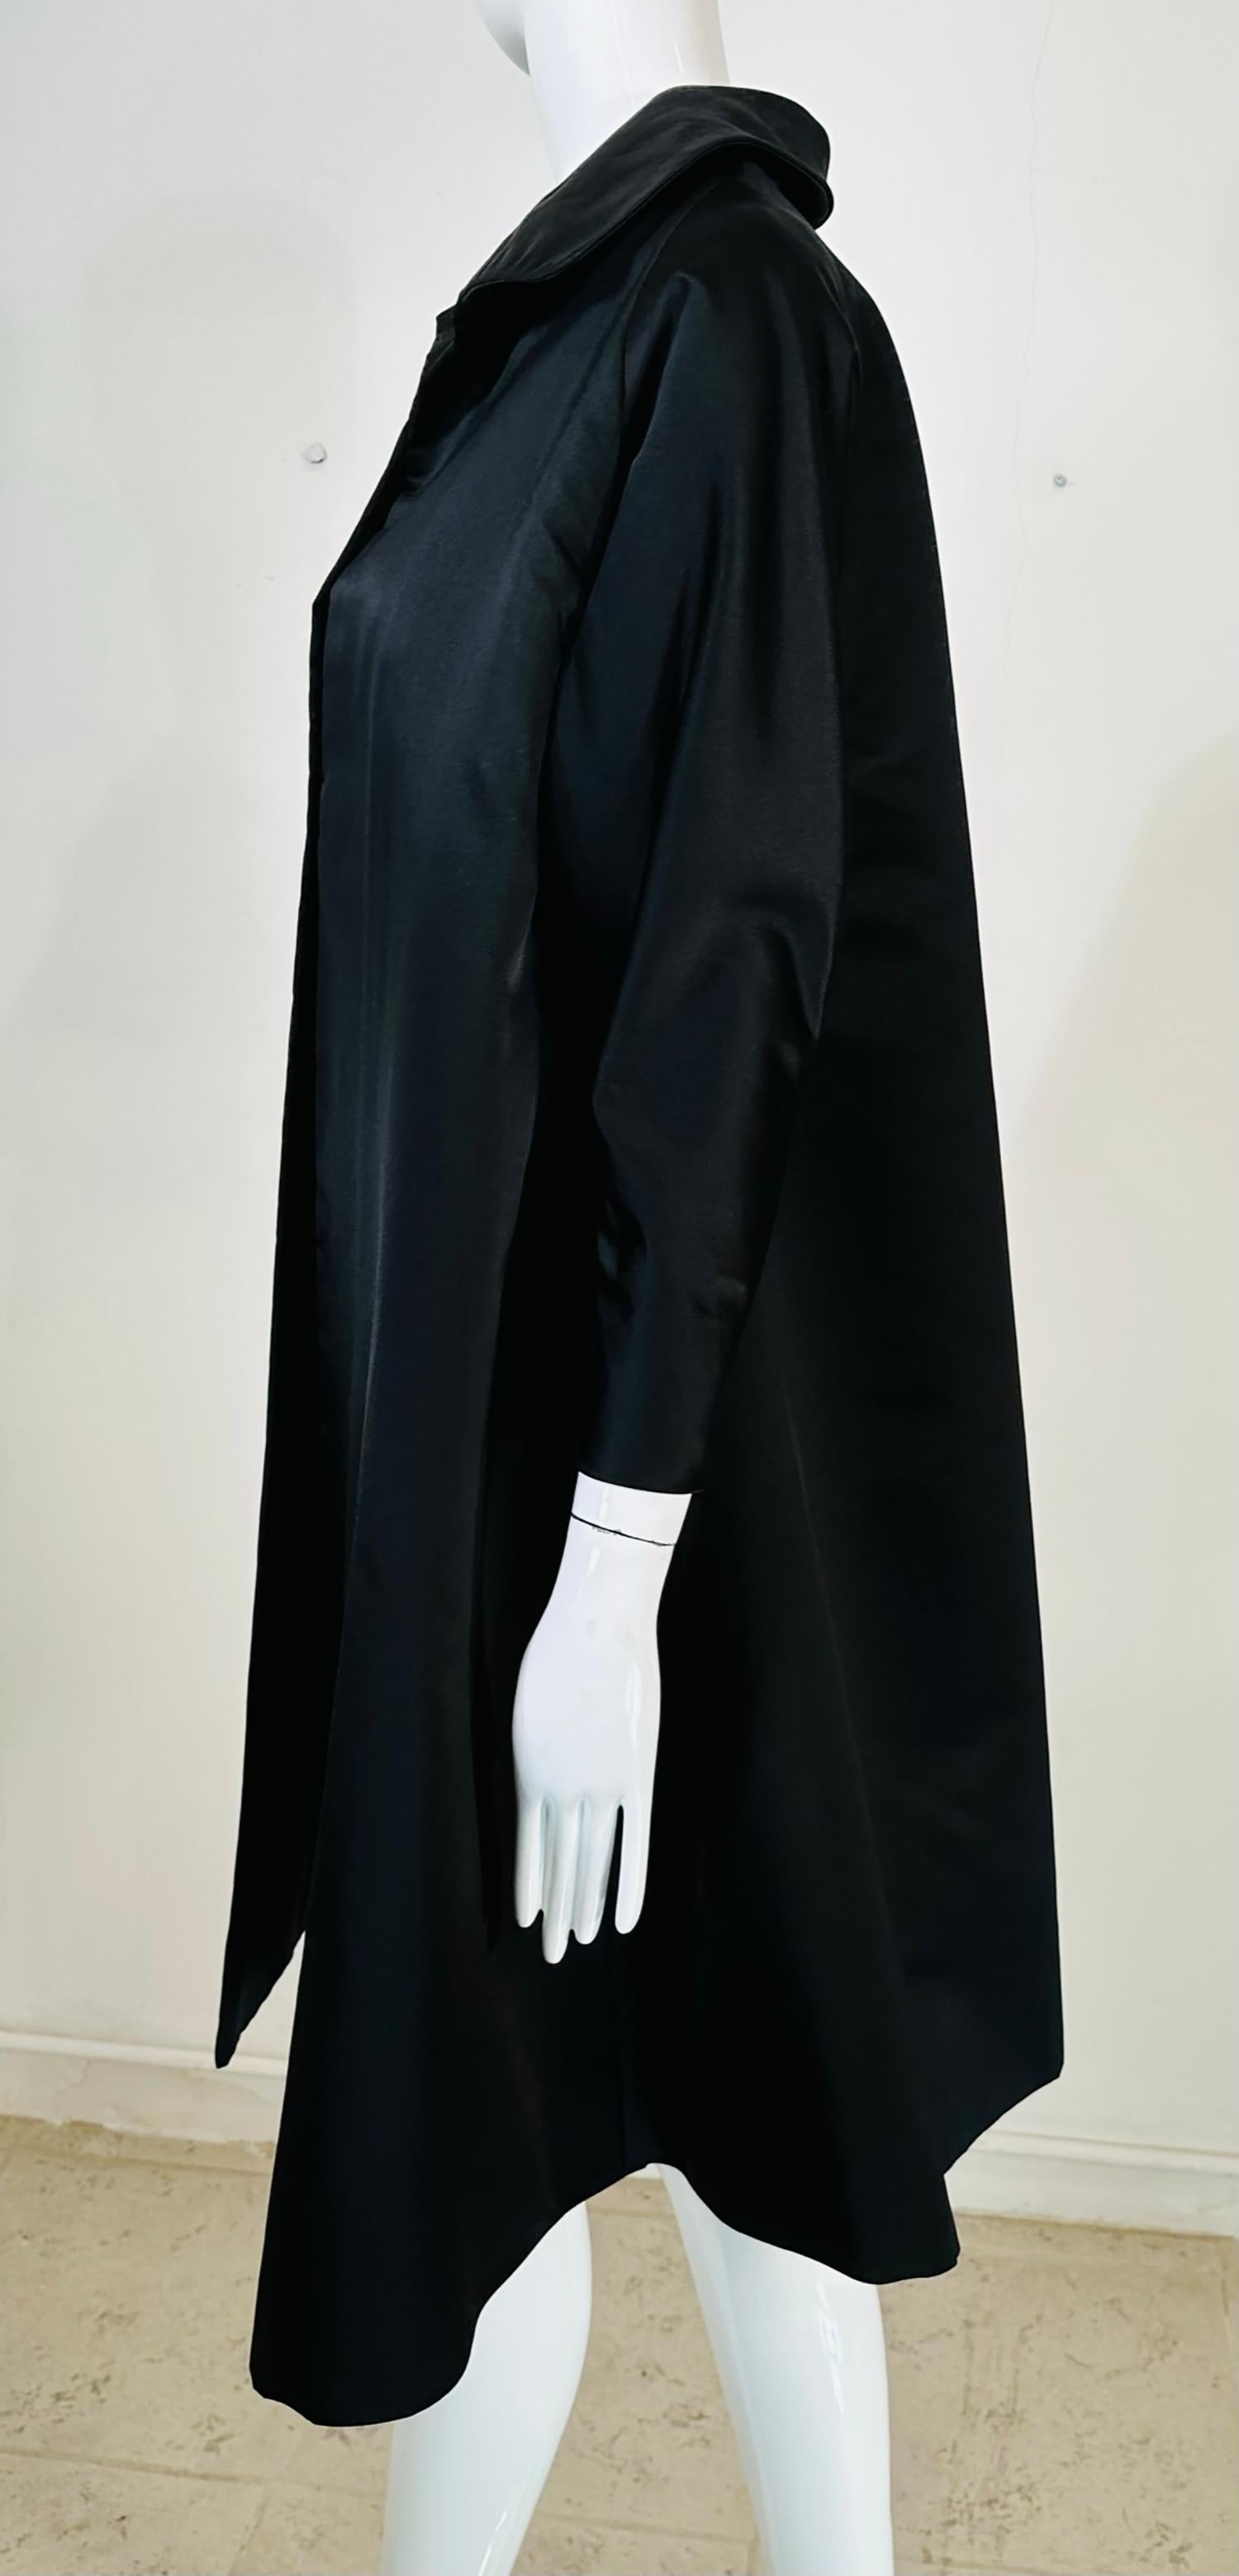 Bergdorf Goodman Demi Couture Trapeze Black Silk Satin Evening Coat 1950s In Excellent Condition For Sale In West Palm Beach, FL